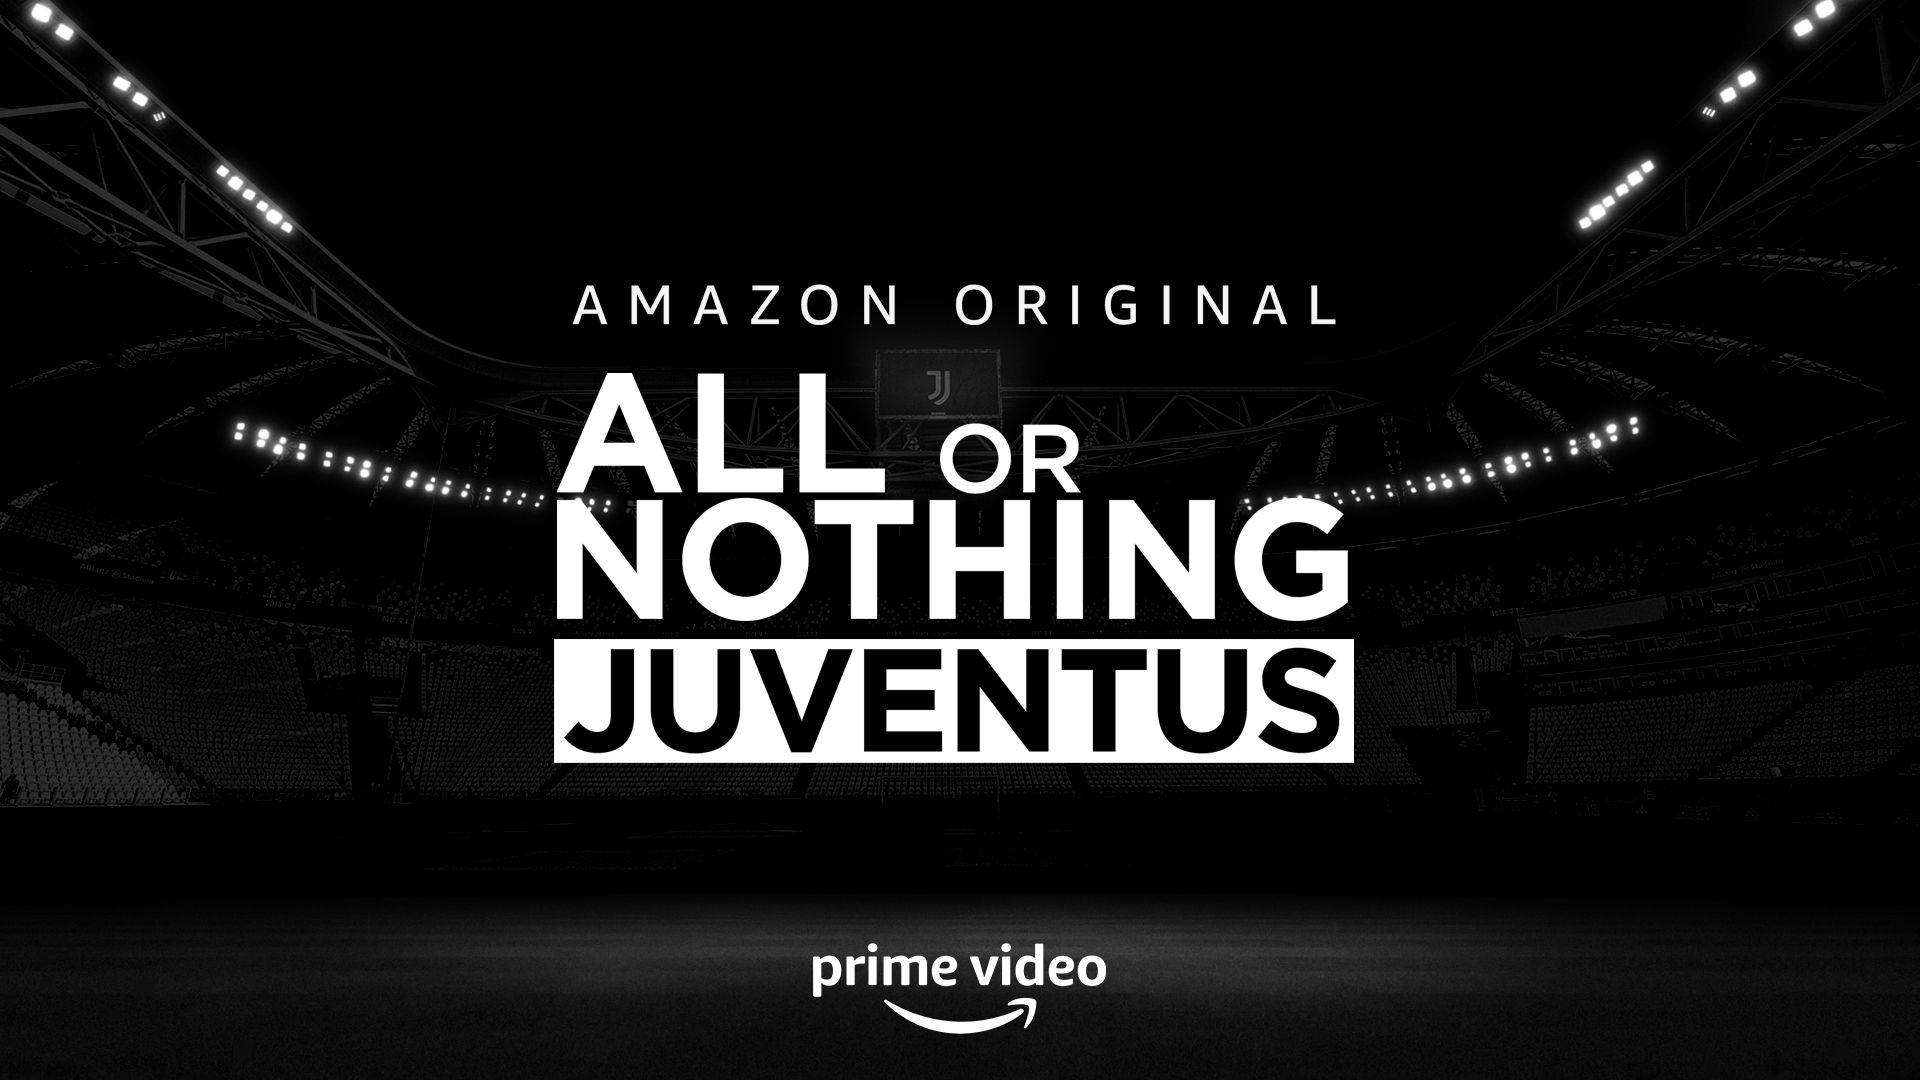 Amazon Teases All Or Nothing Juventus The Latest Season Of Their Sports Doc Series Whattowatch